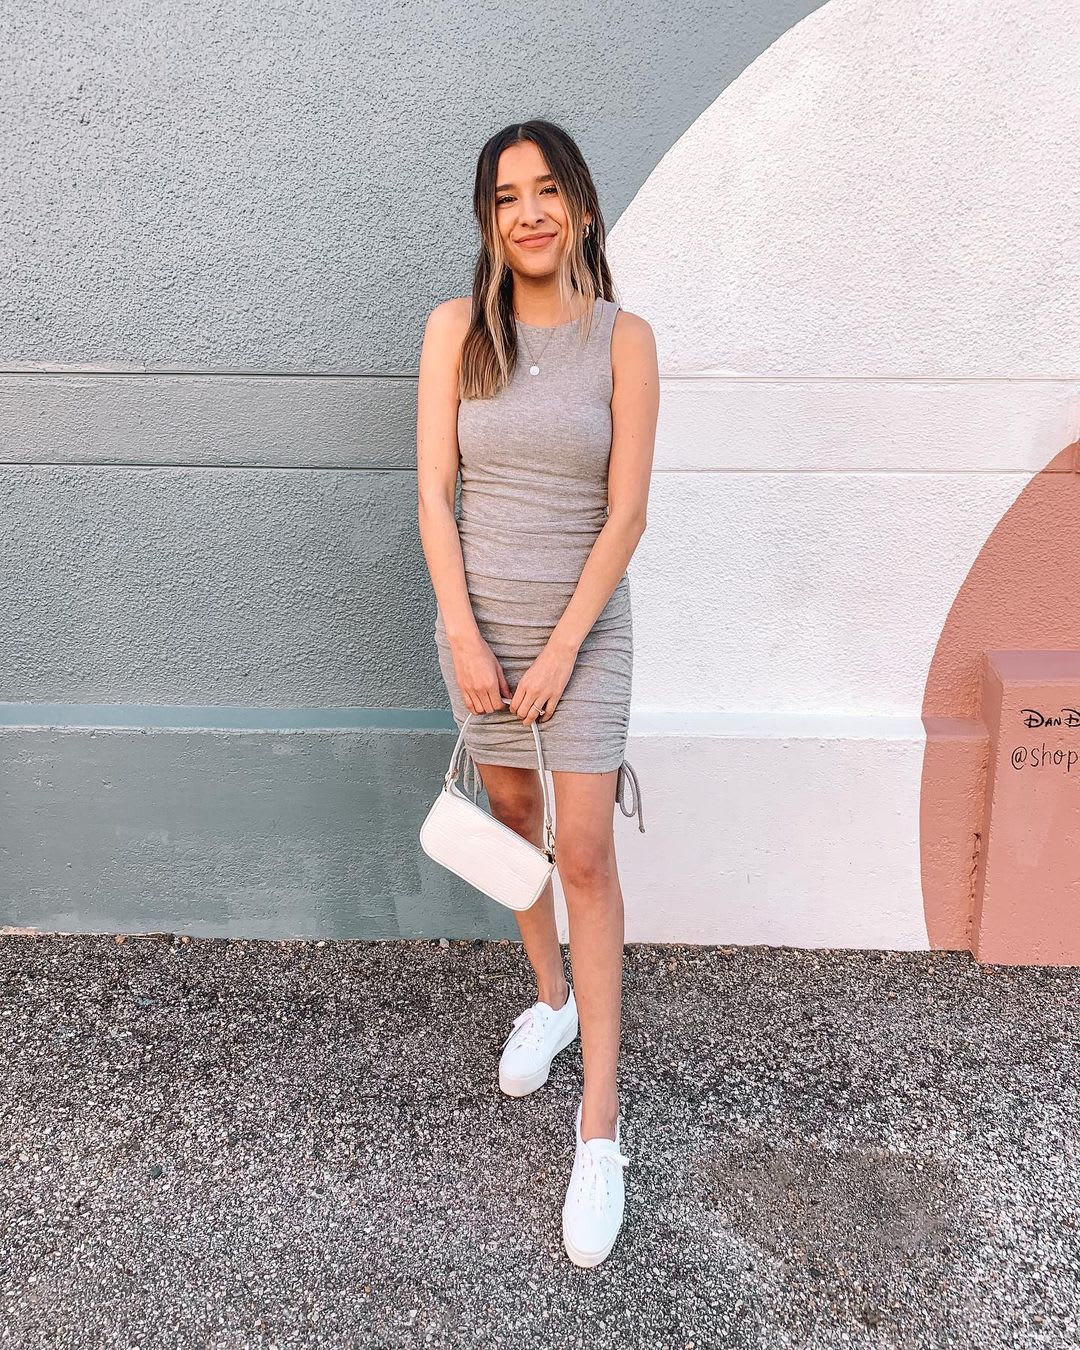 How To Wear Dresses And Sneakers: 11 Cute Outfit Ideas - Lulus.com Fashion  Blog